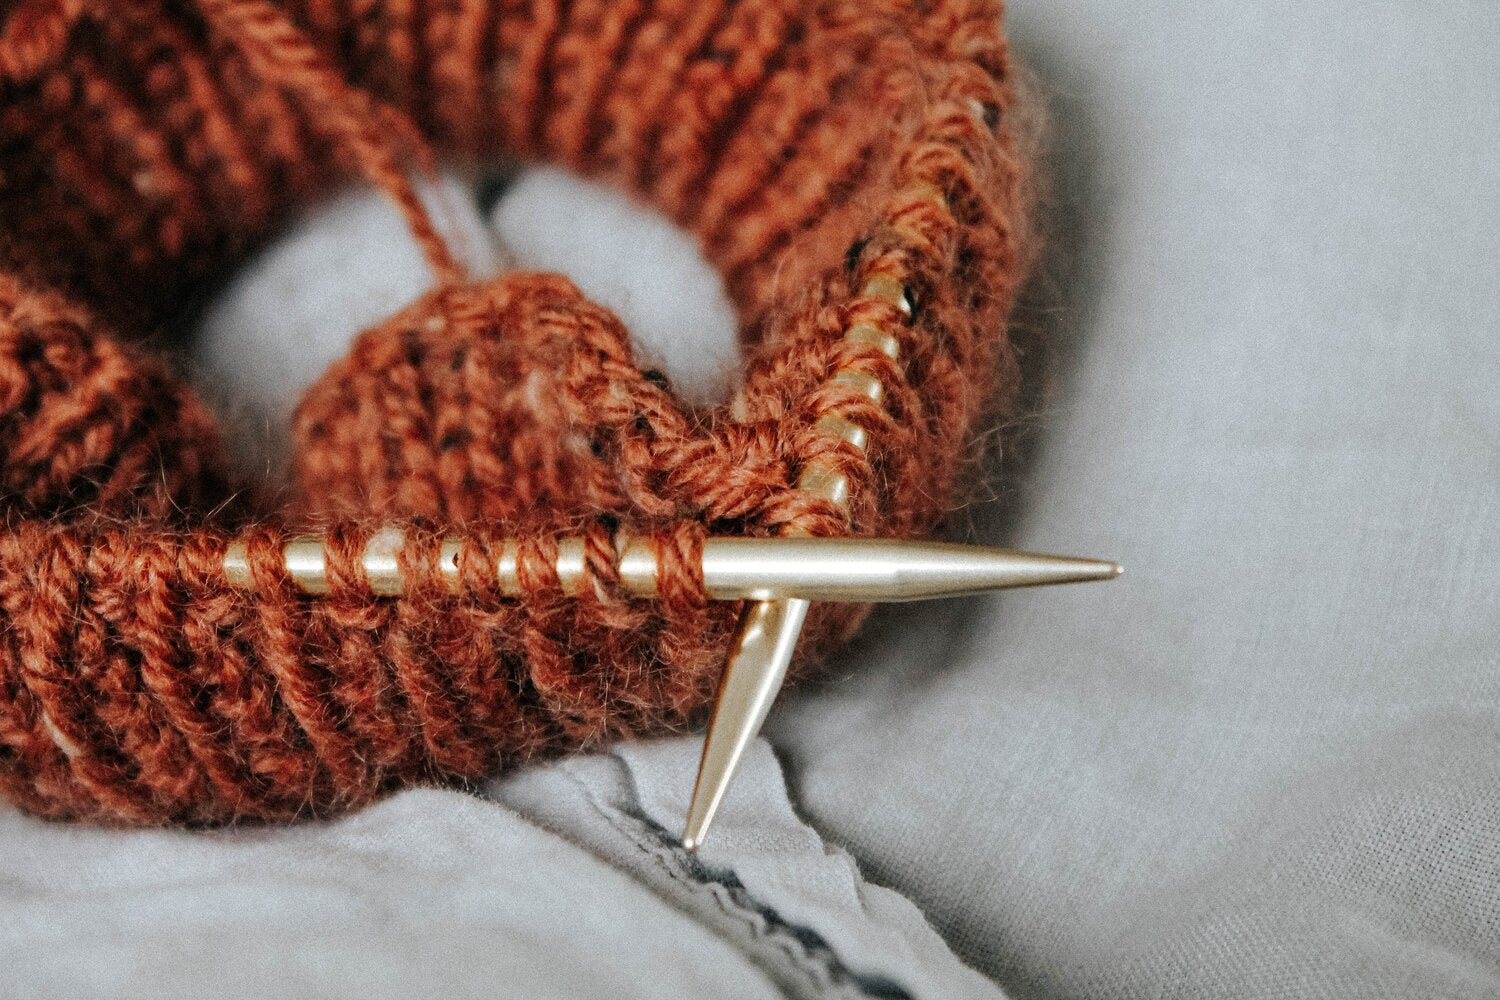 How to Knit for Beginners - The Basics